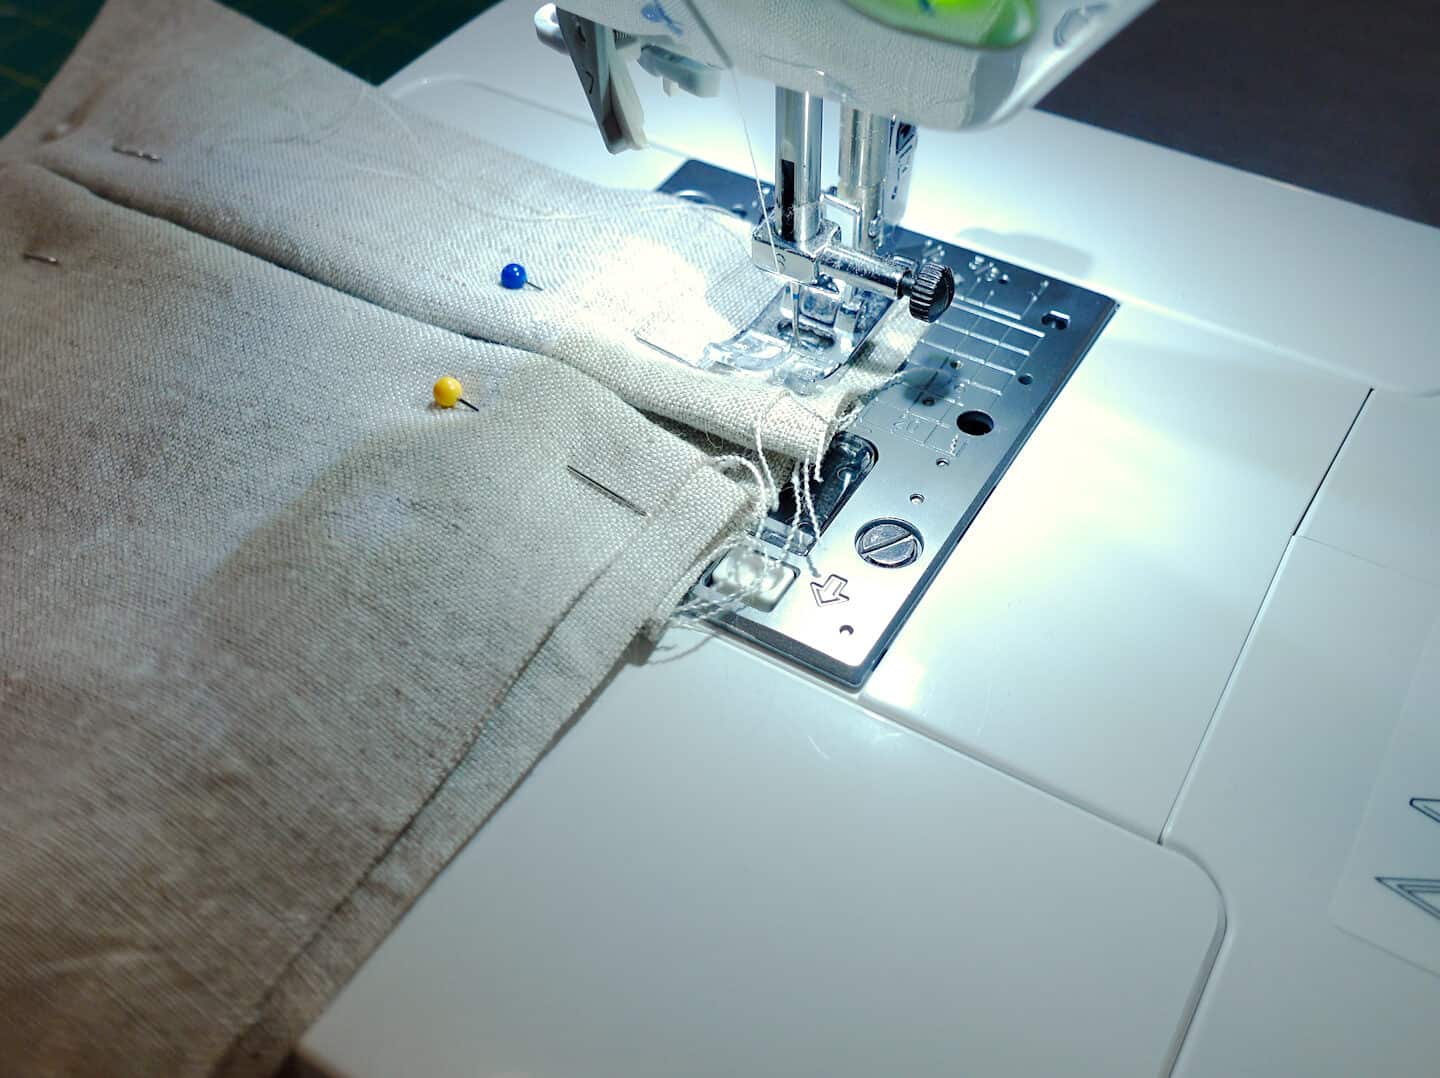 5 Tips for Sewing Machine Shopping